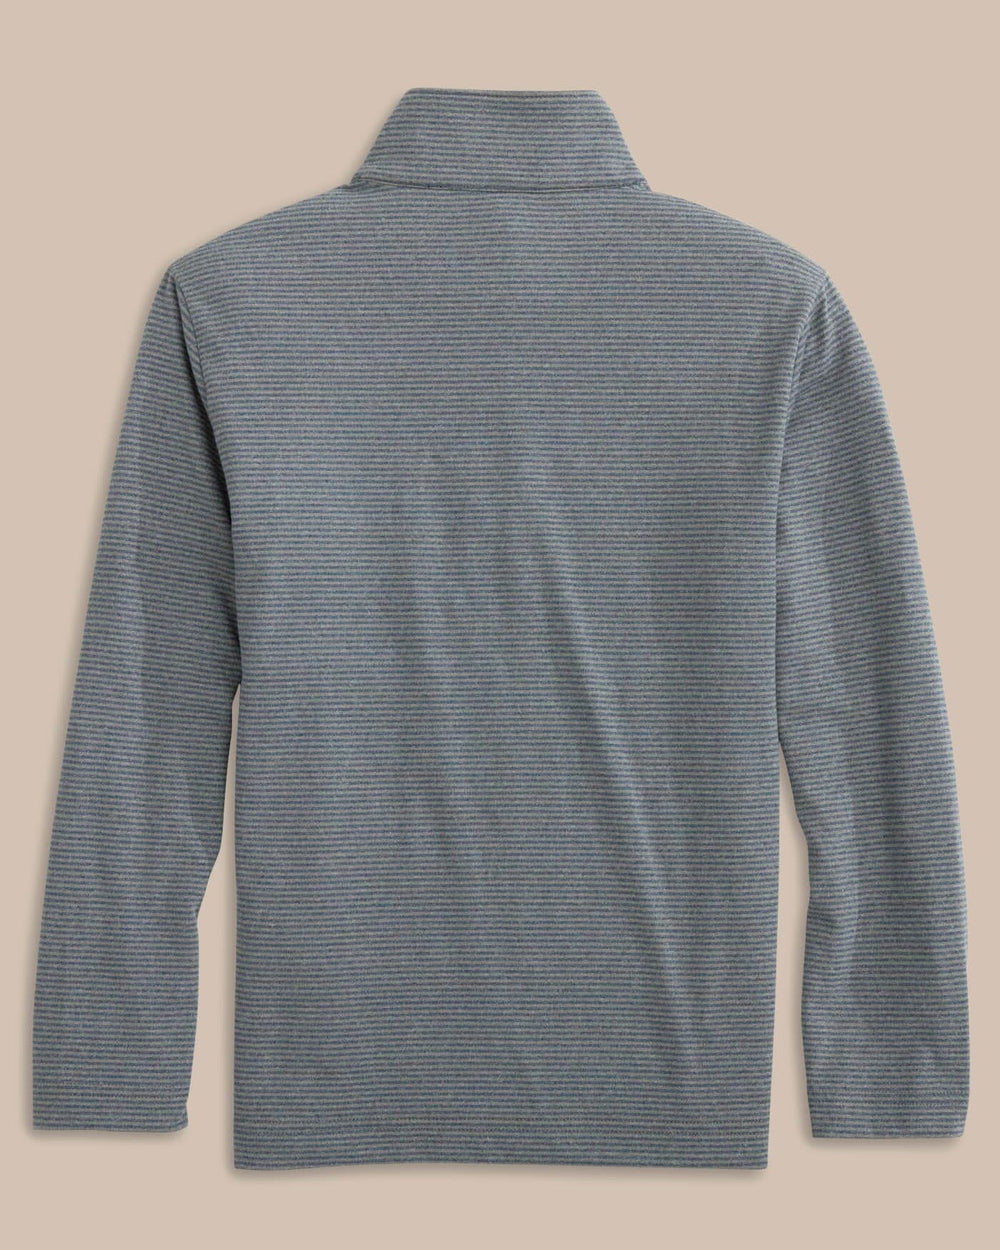 The back view of the Southern Tide Boys Cruiser Heather Micro-Stripe Quarter Zip Pullover by Southern Tide - Heather Shadow Grey